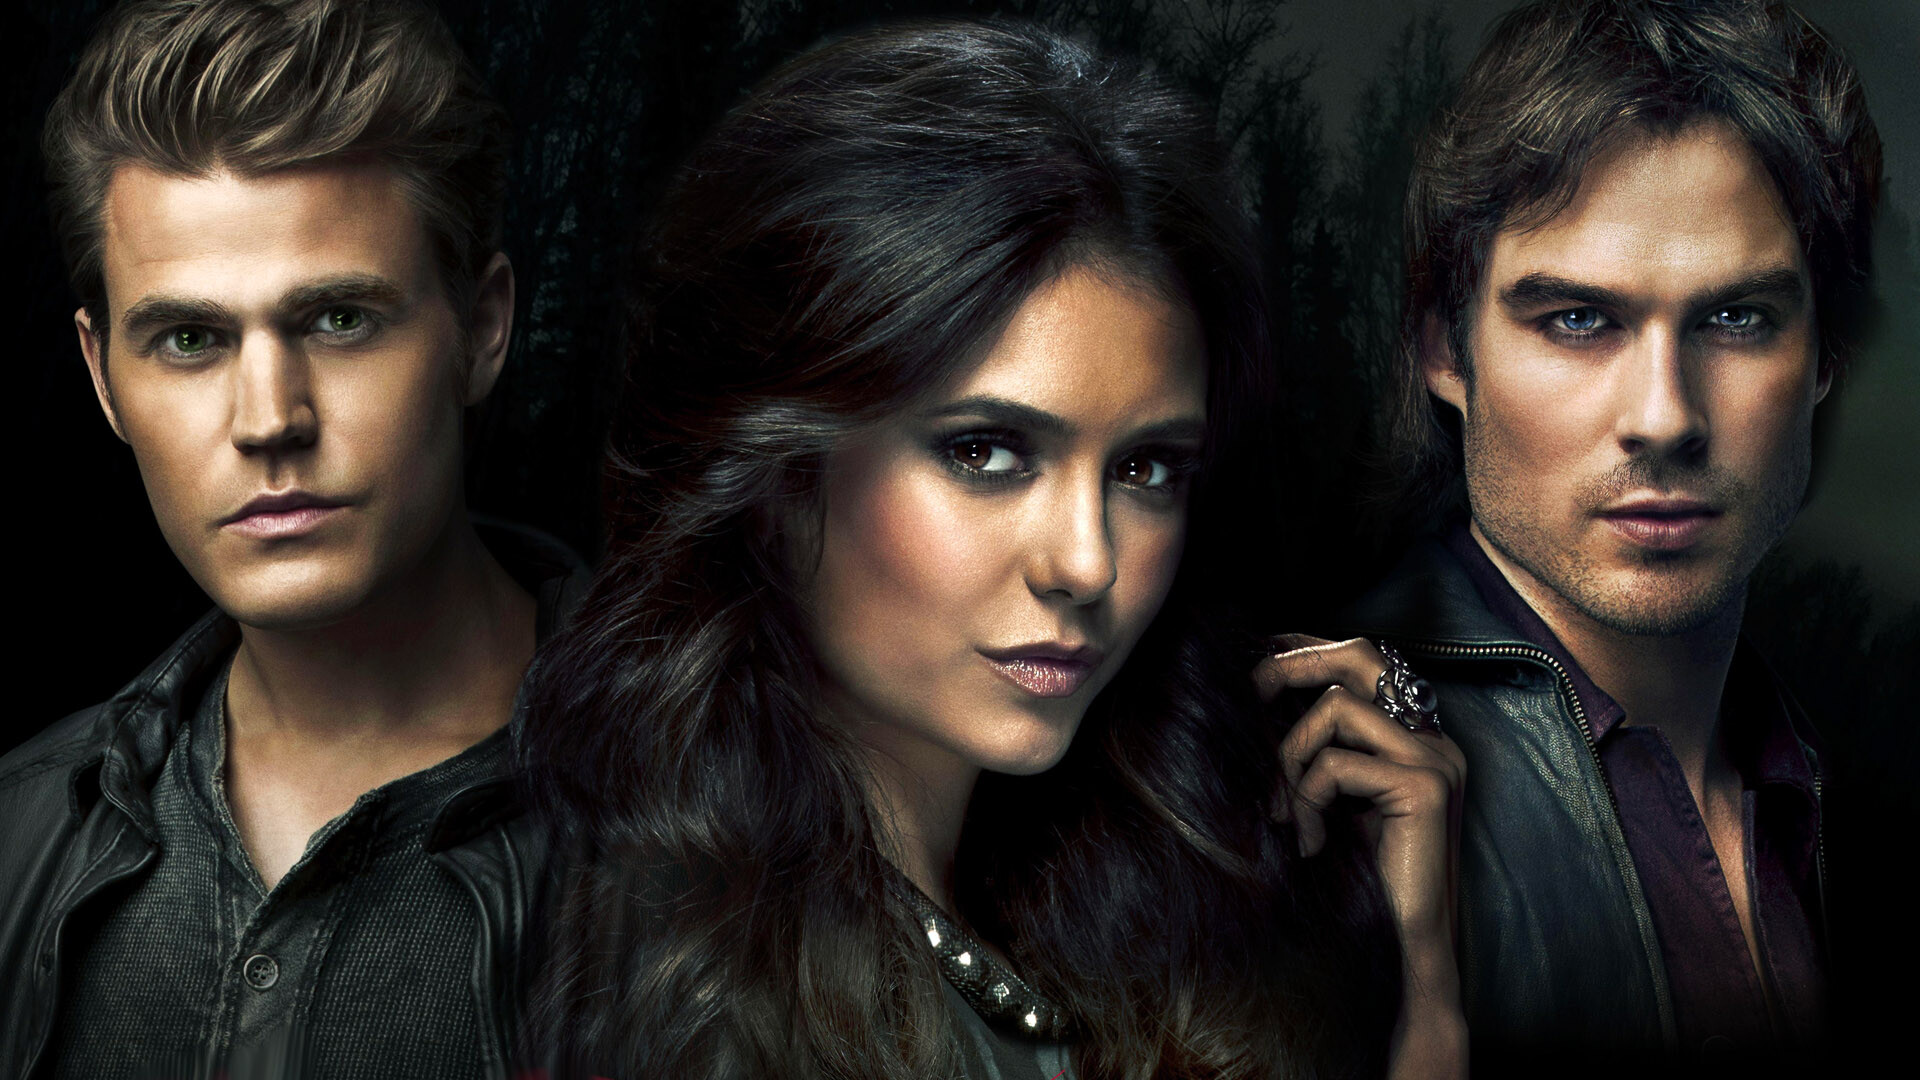 The Vampire Diaries (TV Series): Paul Wesley, Ian Somerhalder, Nina Dobrev, Main And Recurring Roles In Different Episodes Of The Show. 1920x1080 Full HD Wallpaper.